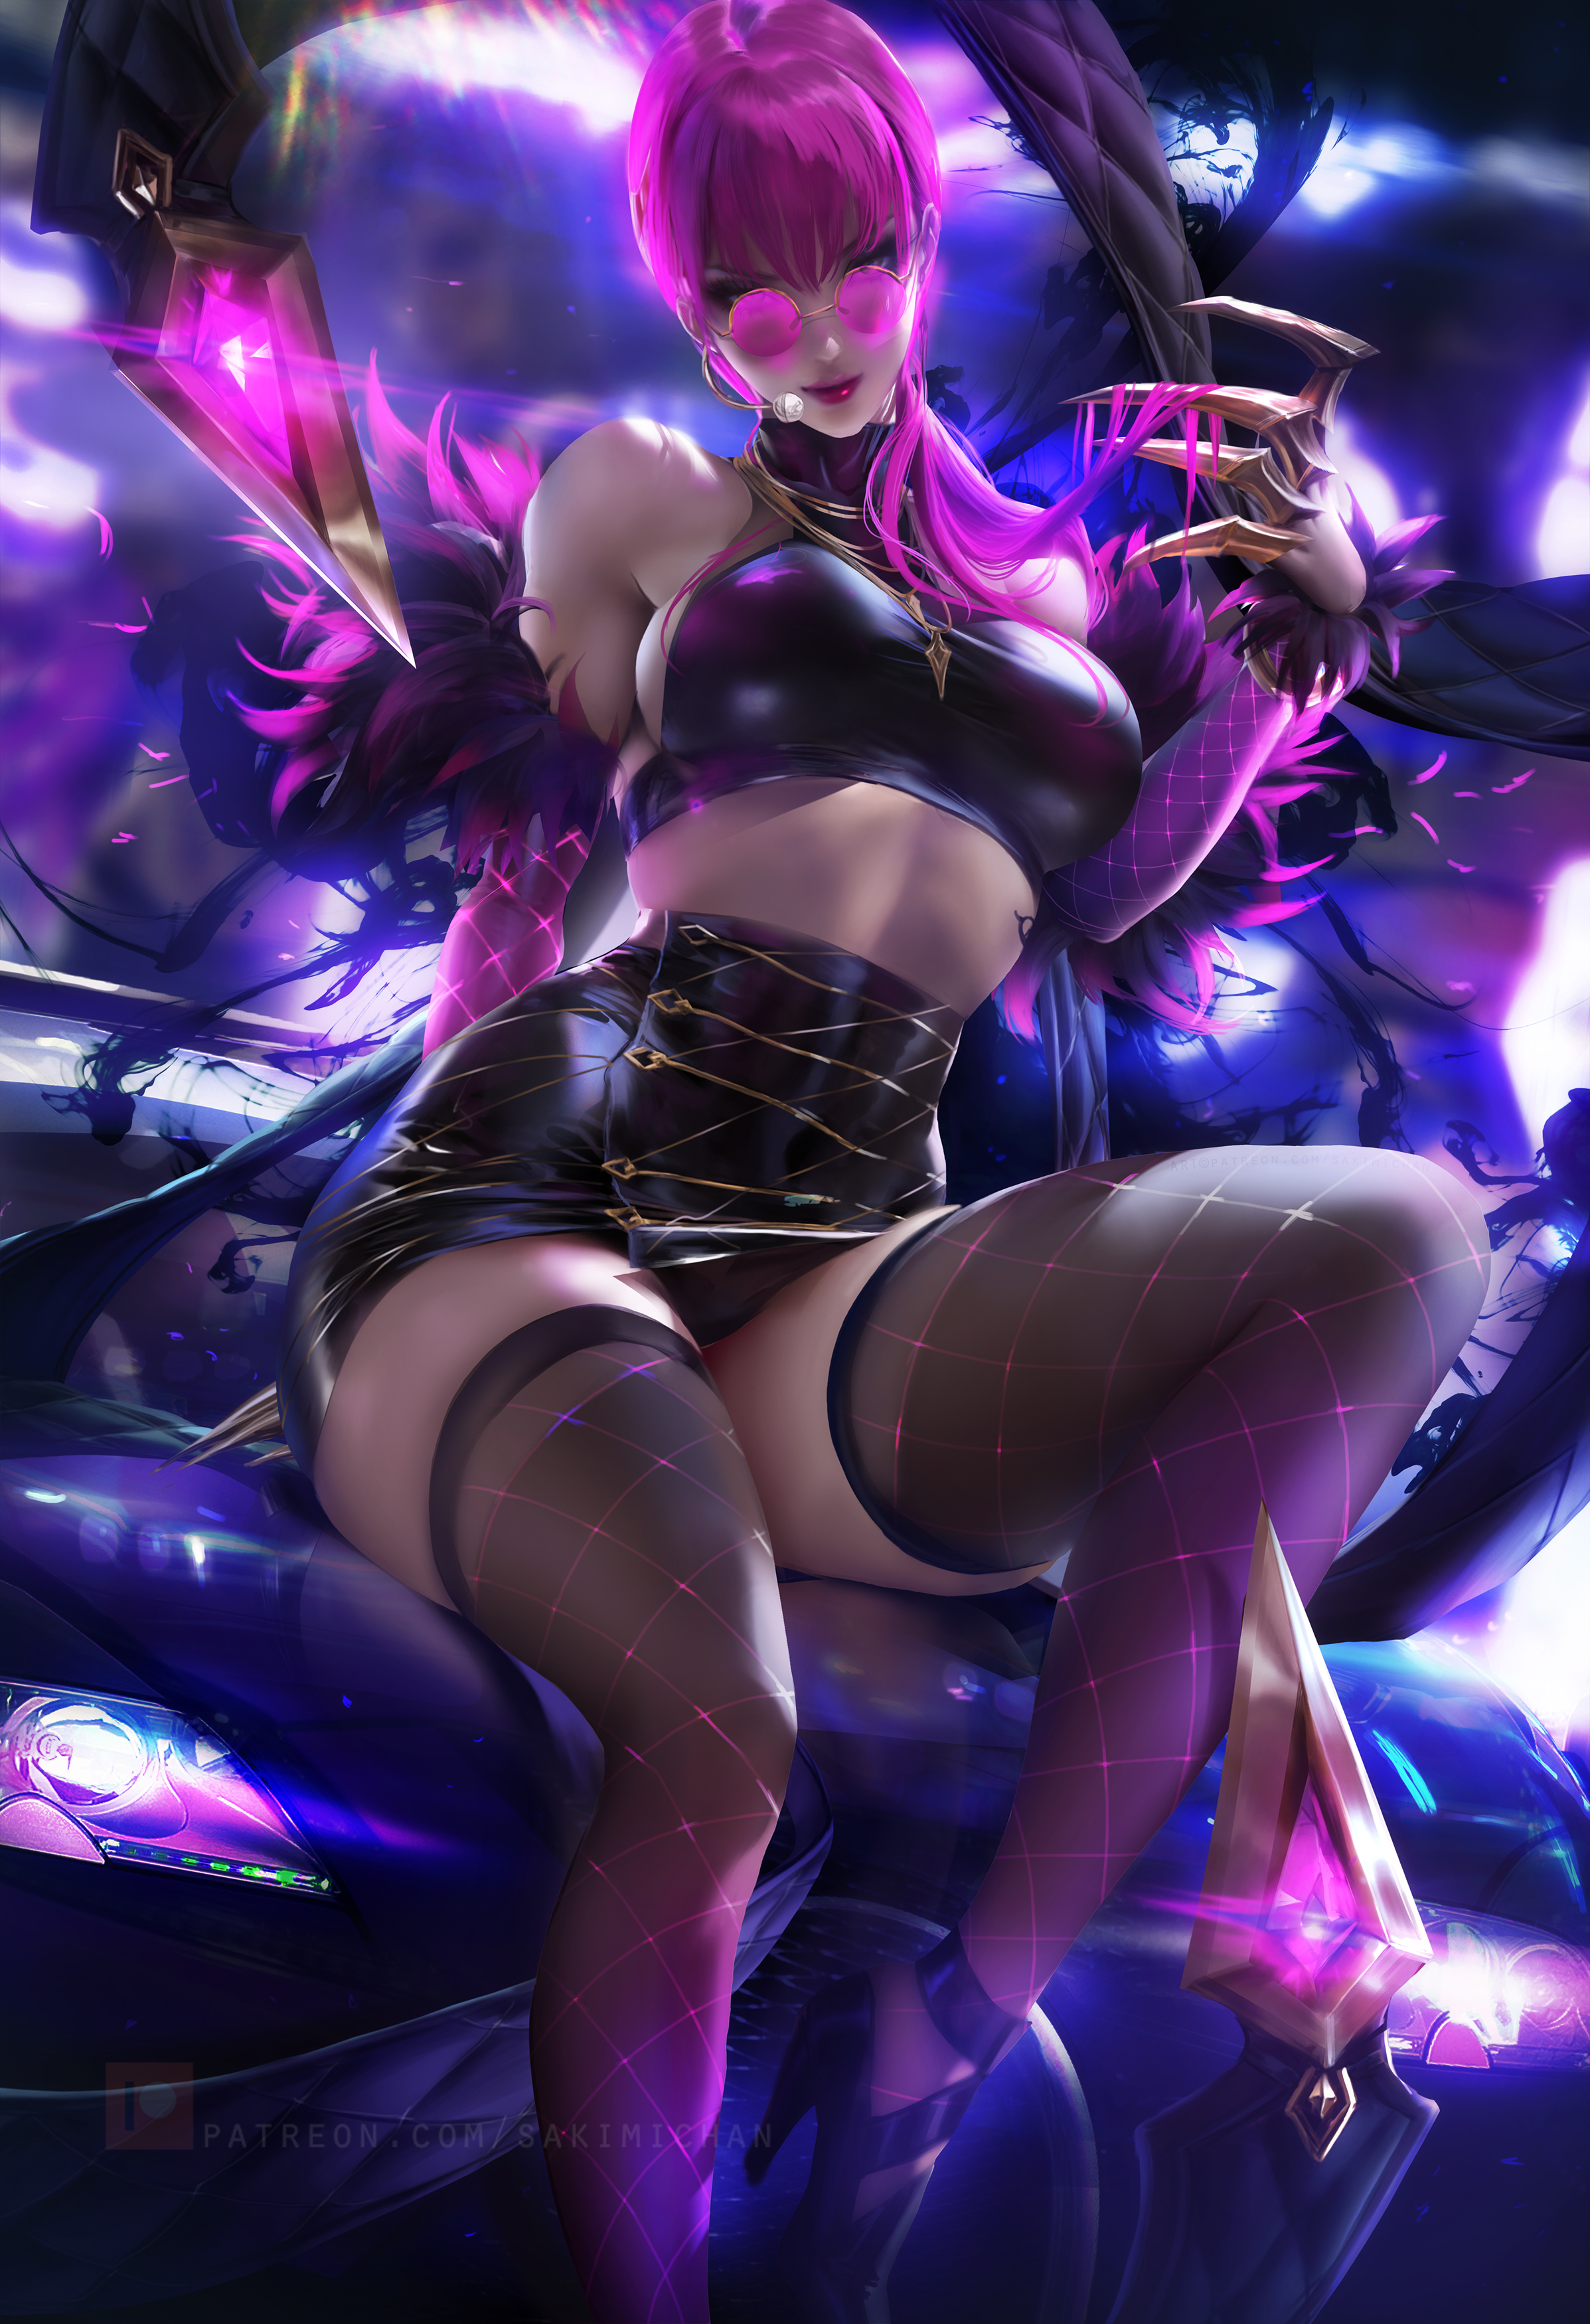 General 2395x3500 Evelynn (League of Legends) League of Legends K/DA video games video game characters video game girls portrait display purple hair bangs glowing women with shades black top miniskirt necklace thick thigh stockings black stockings high heels car women with cars looking at viewer artwork drawing digital art illustration fan art Sakimichan sideboob